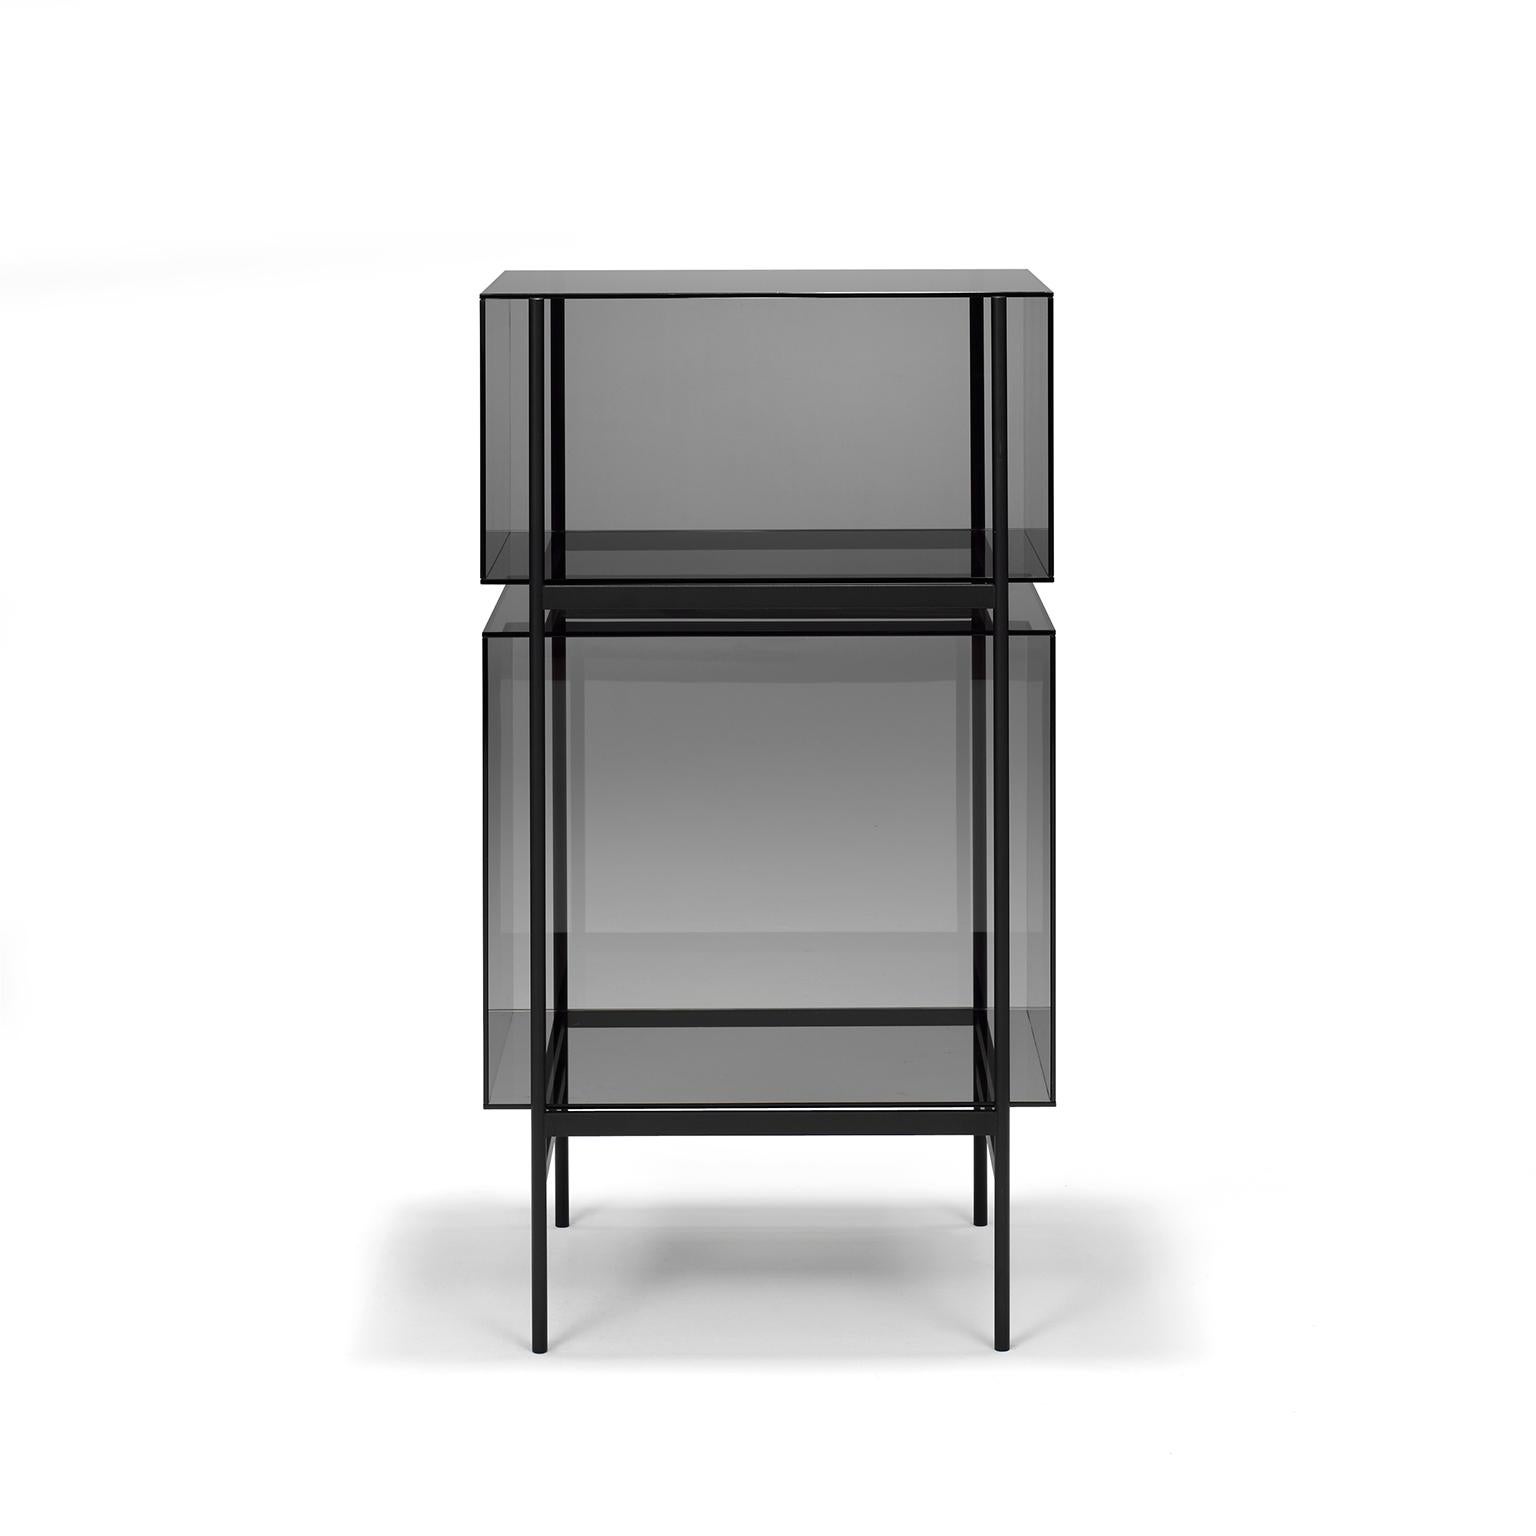 Lyn cabinet, European, Minimalist, grey, black base, German, cabinet, 21st century, small size

Studio Visser & Meijwaard describe their conception of lyn as a “graphic interplay between glass and the metal frameworks”. The doorless and diverse